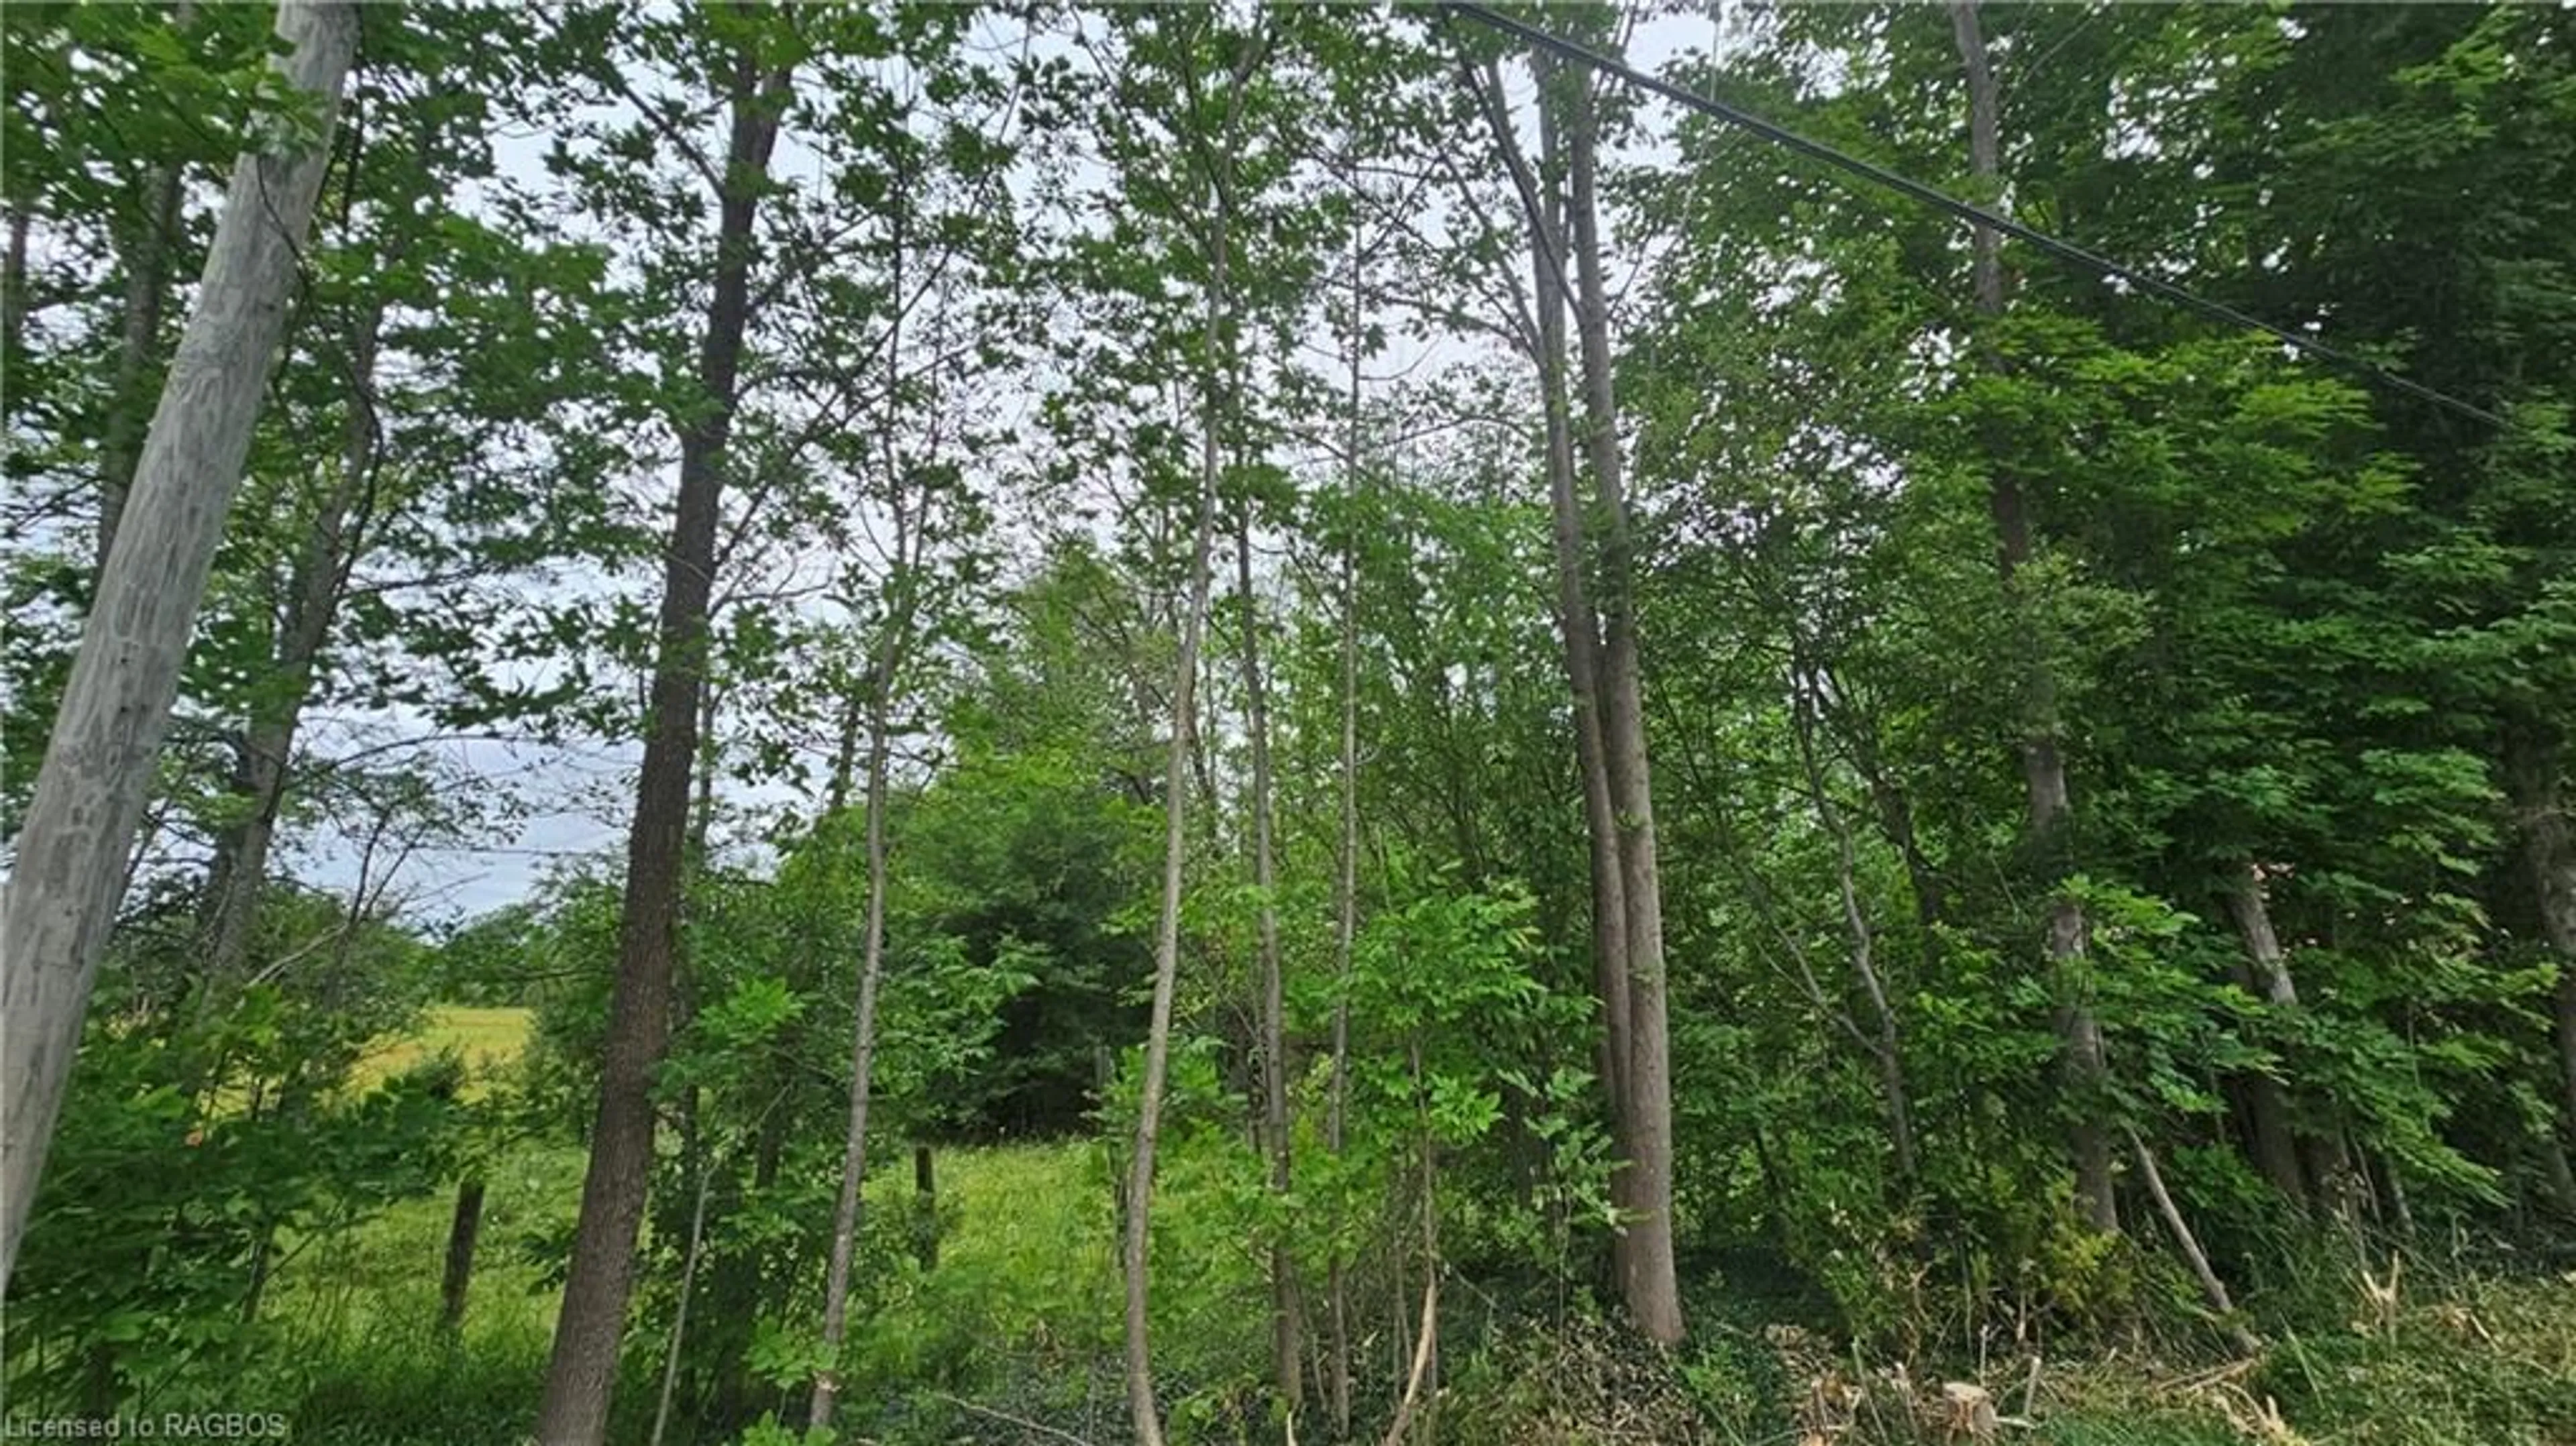 Forest view for PT LT 25 Purple Valley Rd, South Bruce Peninsula Ontario N0H 2T0